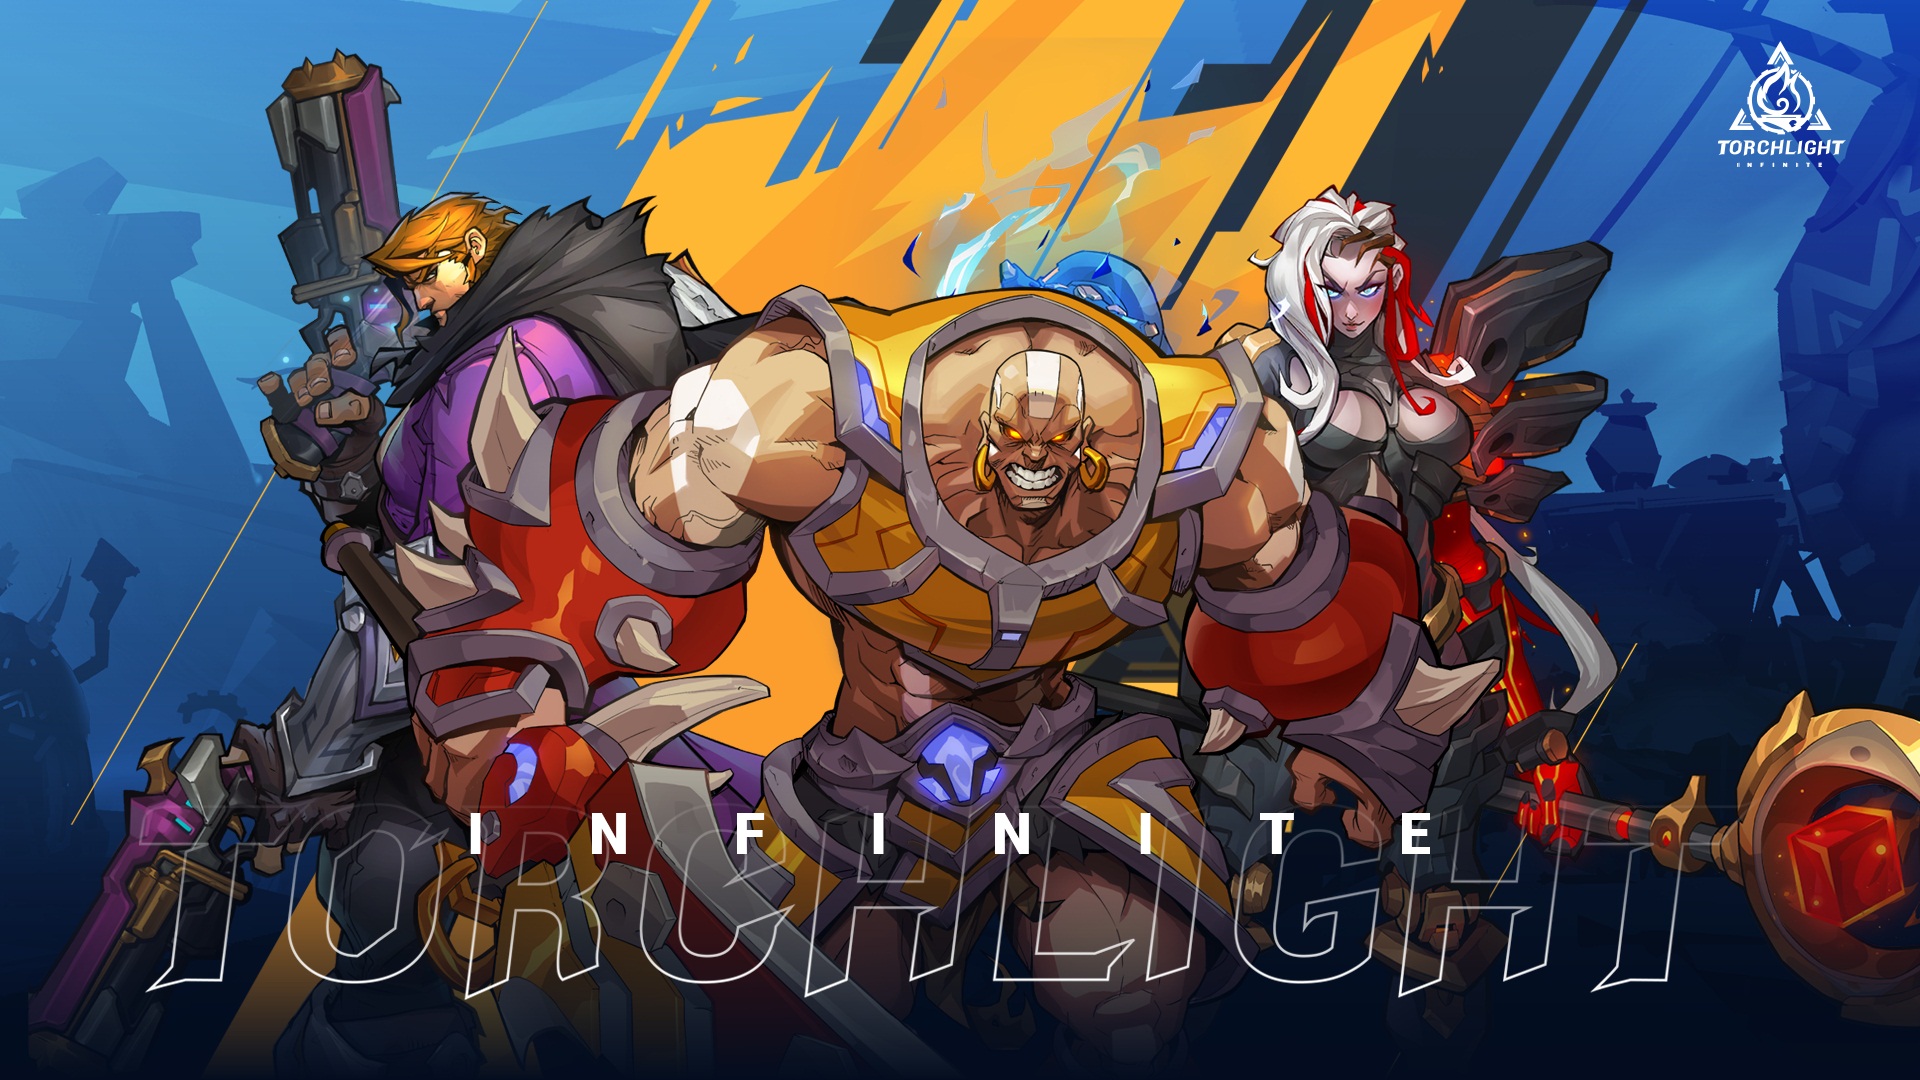 Torchlight Infinite: A reimagining of the Torchlight video game series